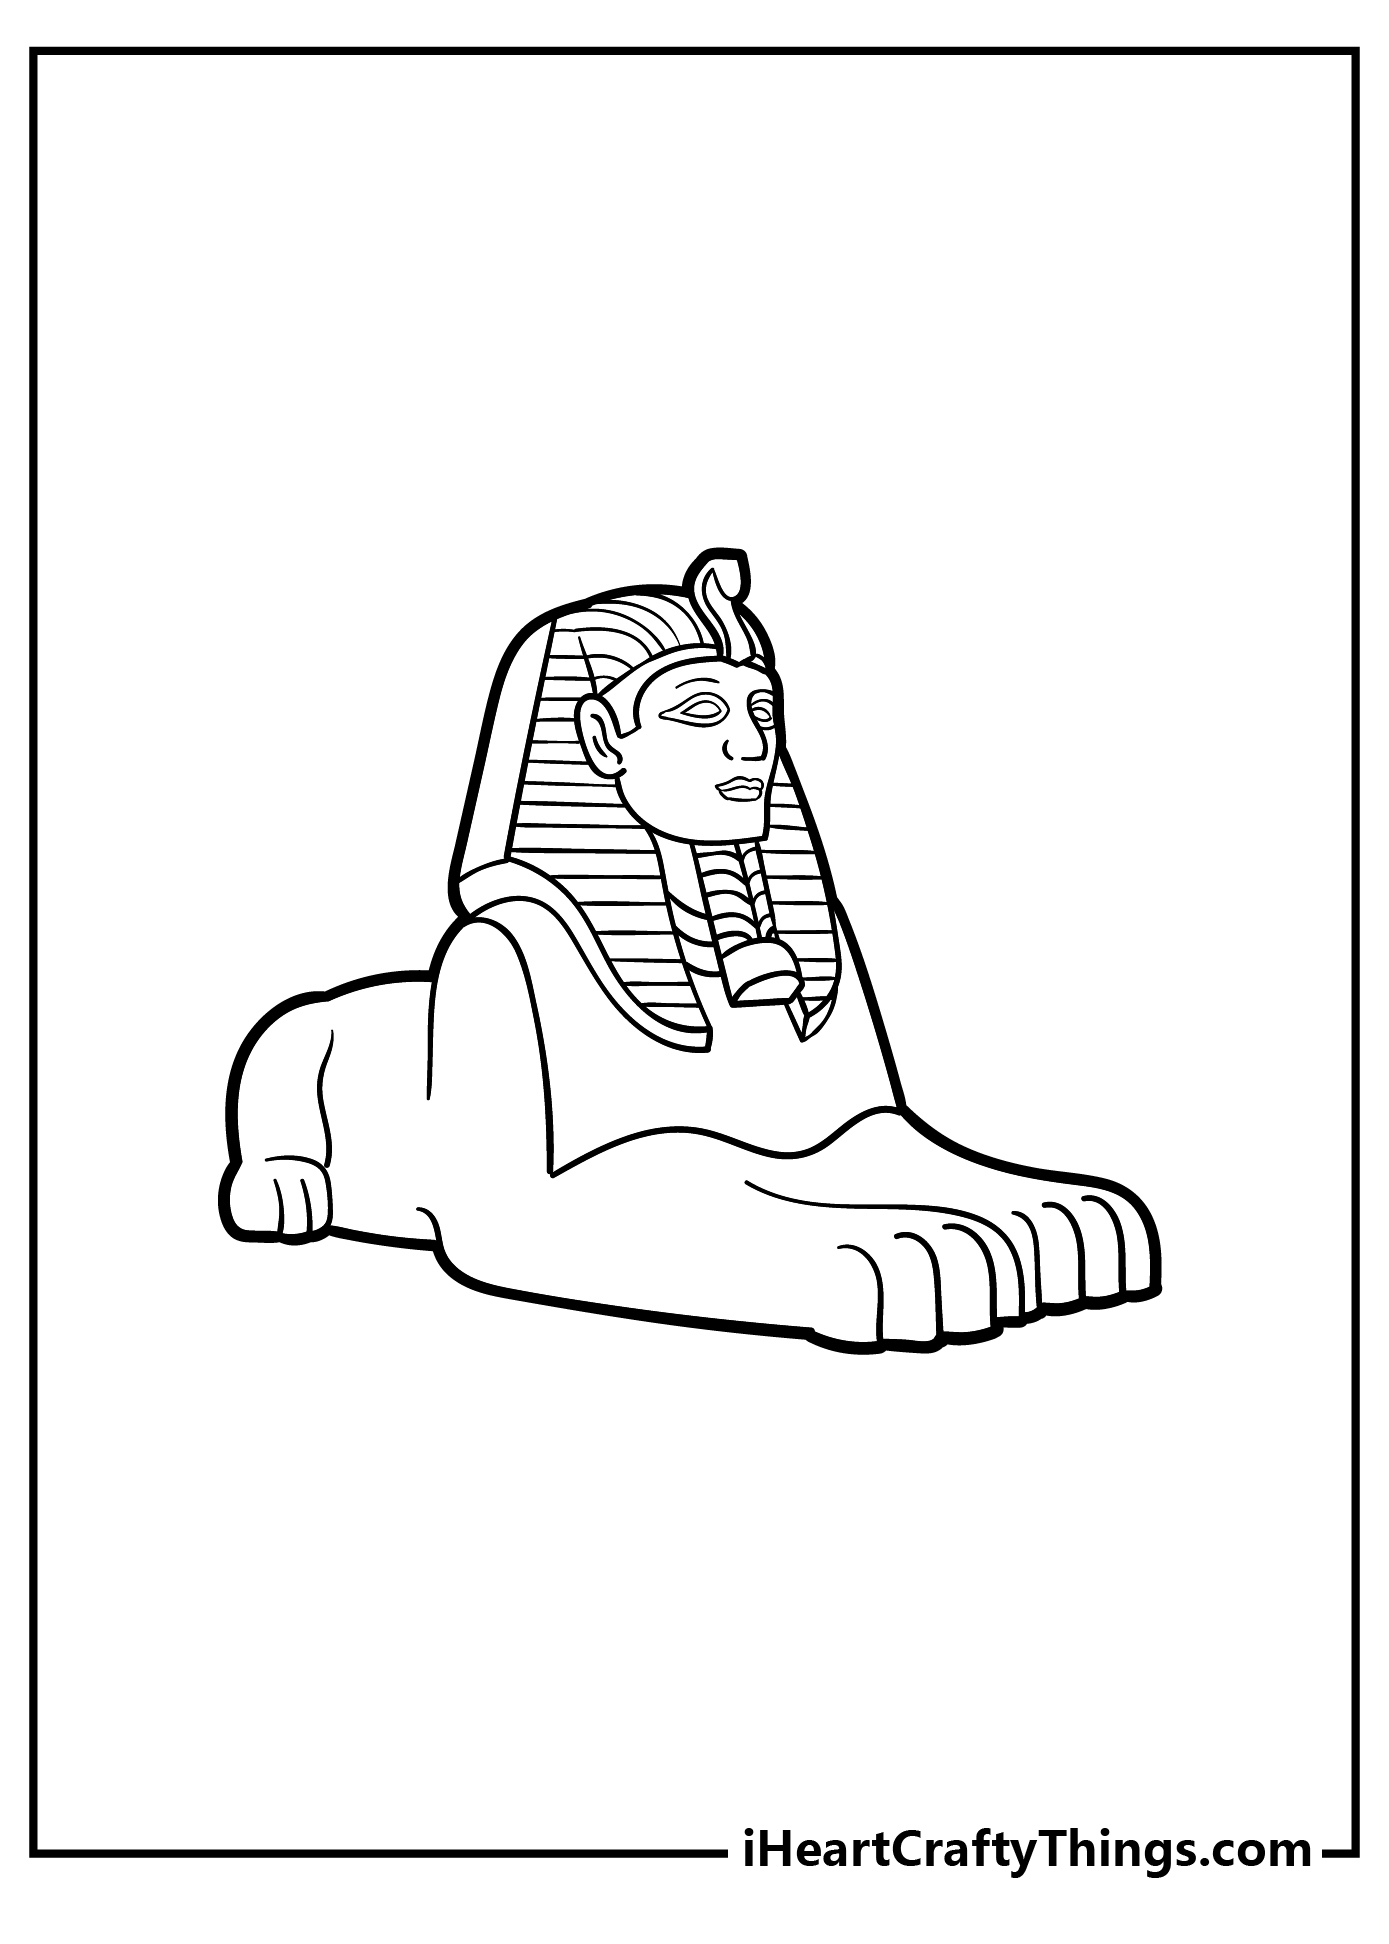 Printable Egyptian Coloring Pages Updated 20